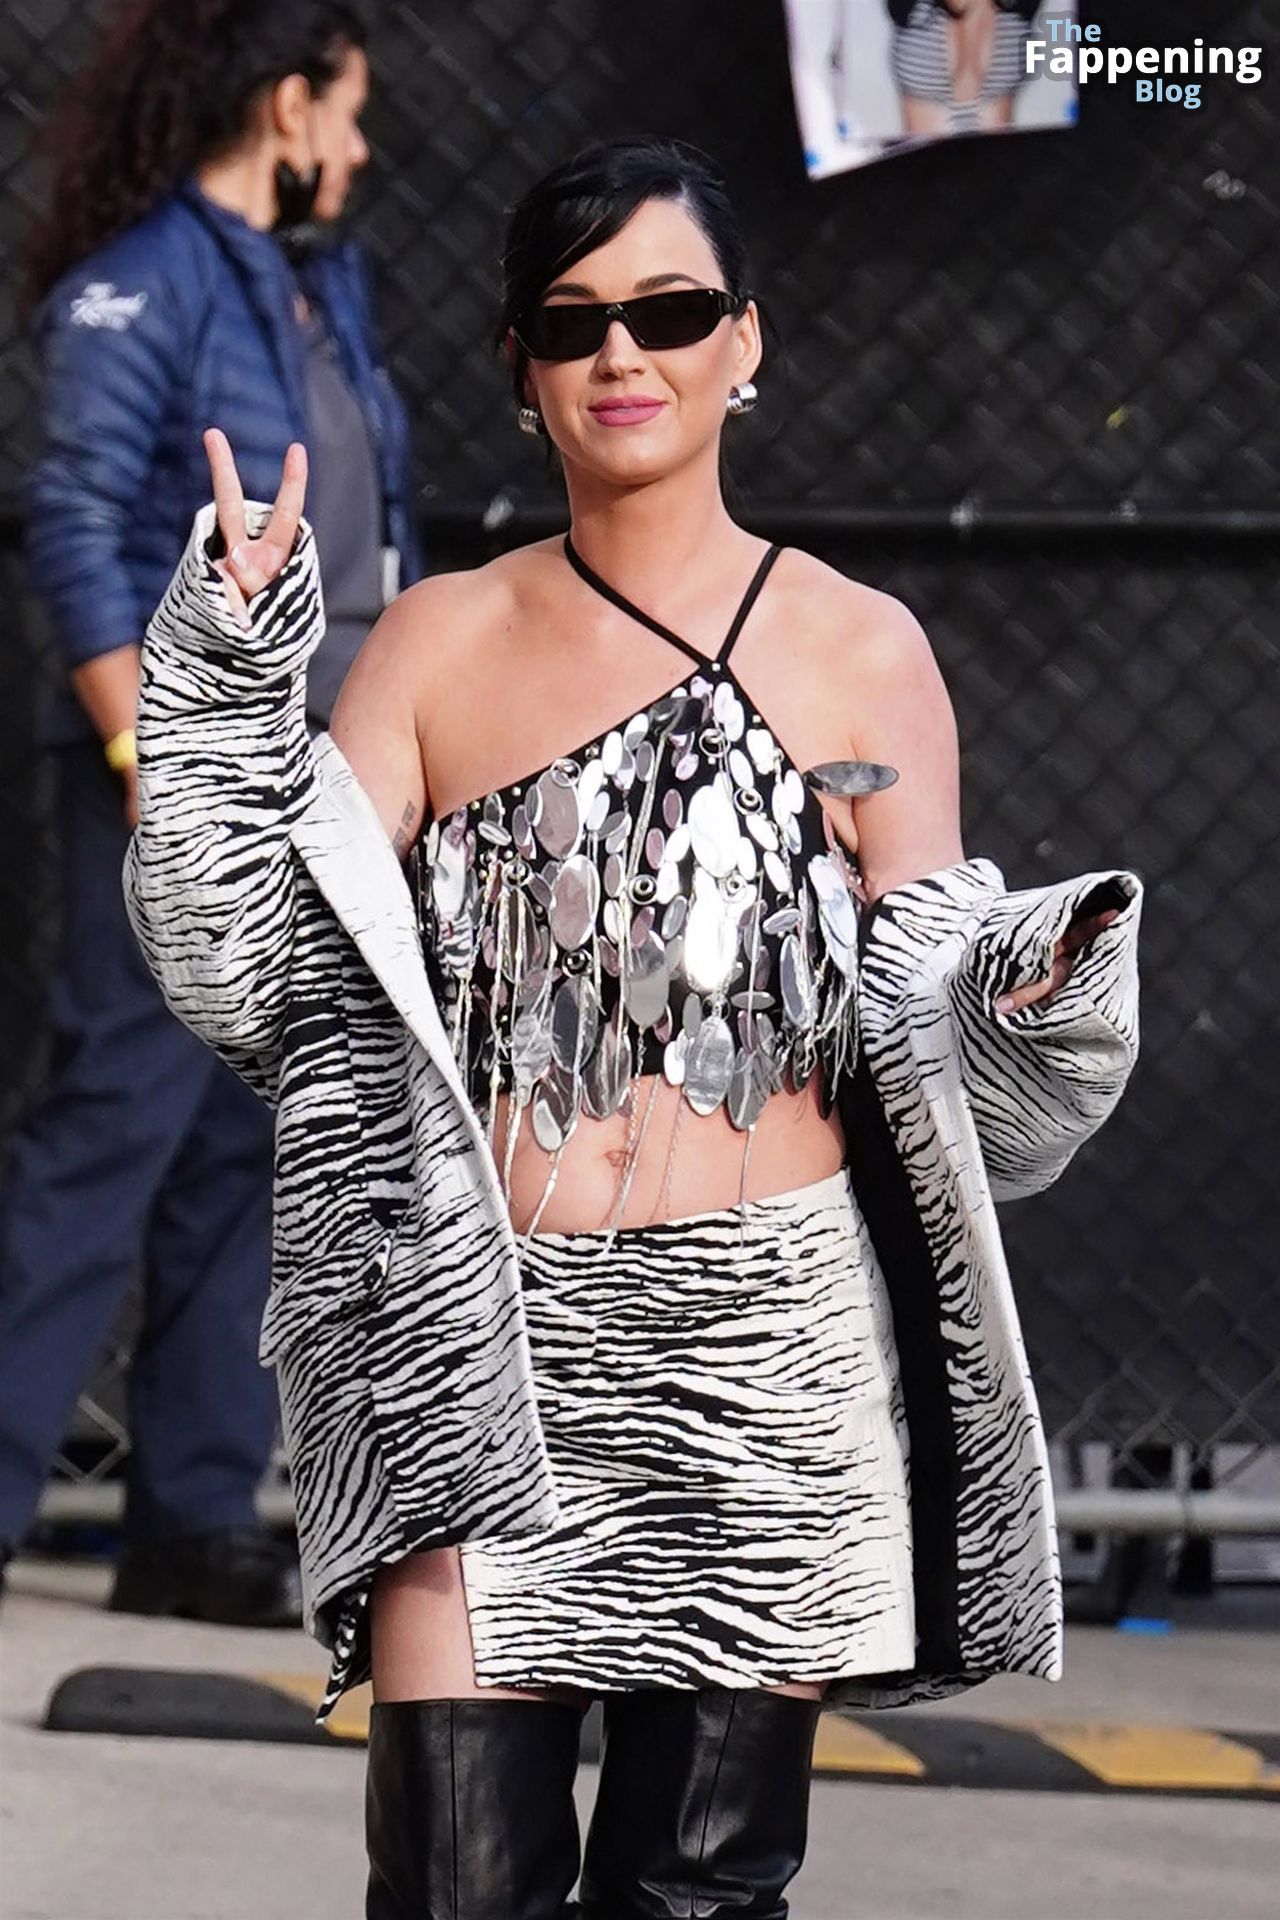 Katy Perry Sparkles in a Crop Top as she Heads Into Jimmy Kimmel Live Studio in Hollywood (112 New Photos)